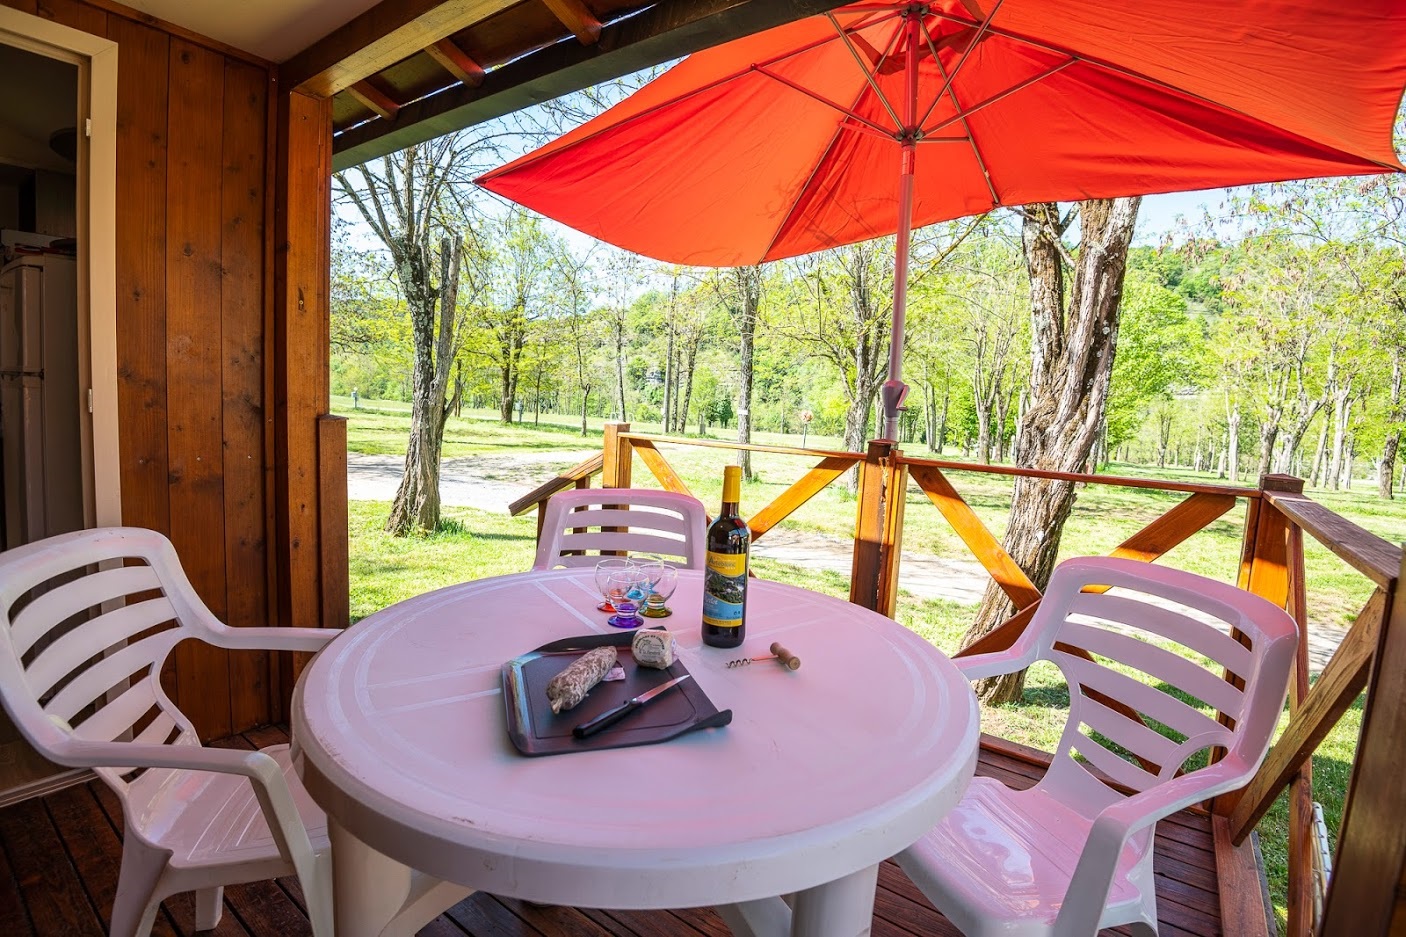 Accommodation - Chalet 2 Bedrooms - Included Accommodation And Food Half Board (Breakfast + Dinner) - Camping Domaine Arleblanc